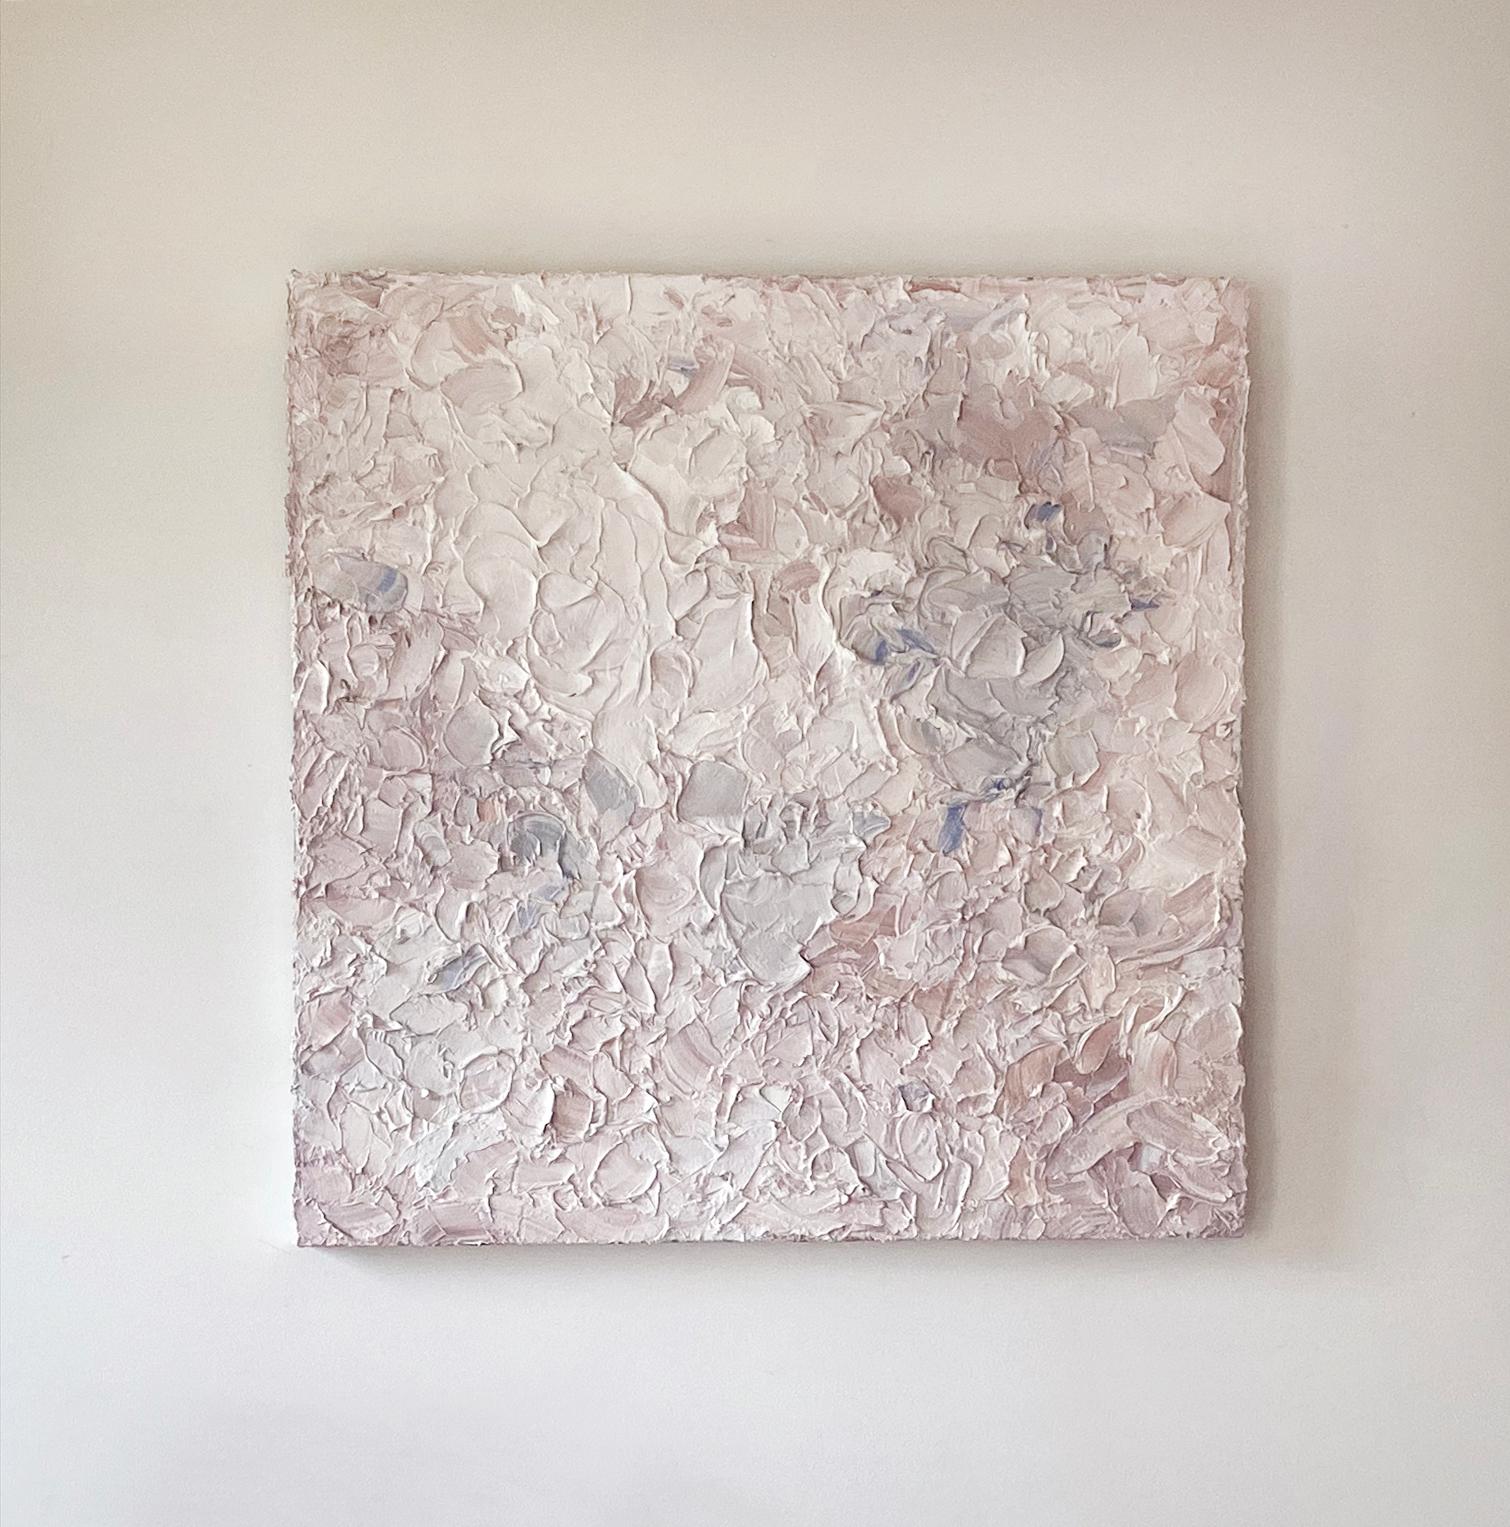 This medium-scale, abstract statement painting is made with oil paint on gallery wrapped canvas. Thick strokes of Gamblin's new grays are layered and layered until the surface feels sculpture like. Small areas of rose and lavender grey can be found